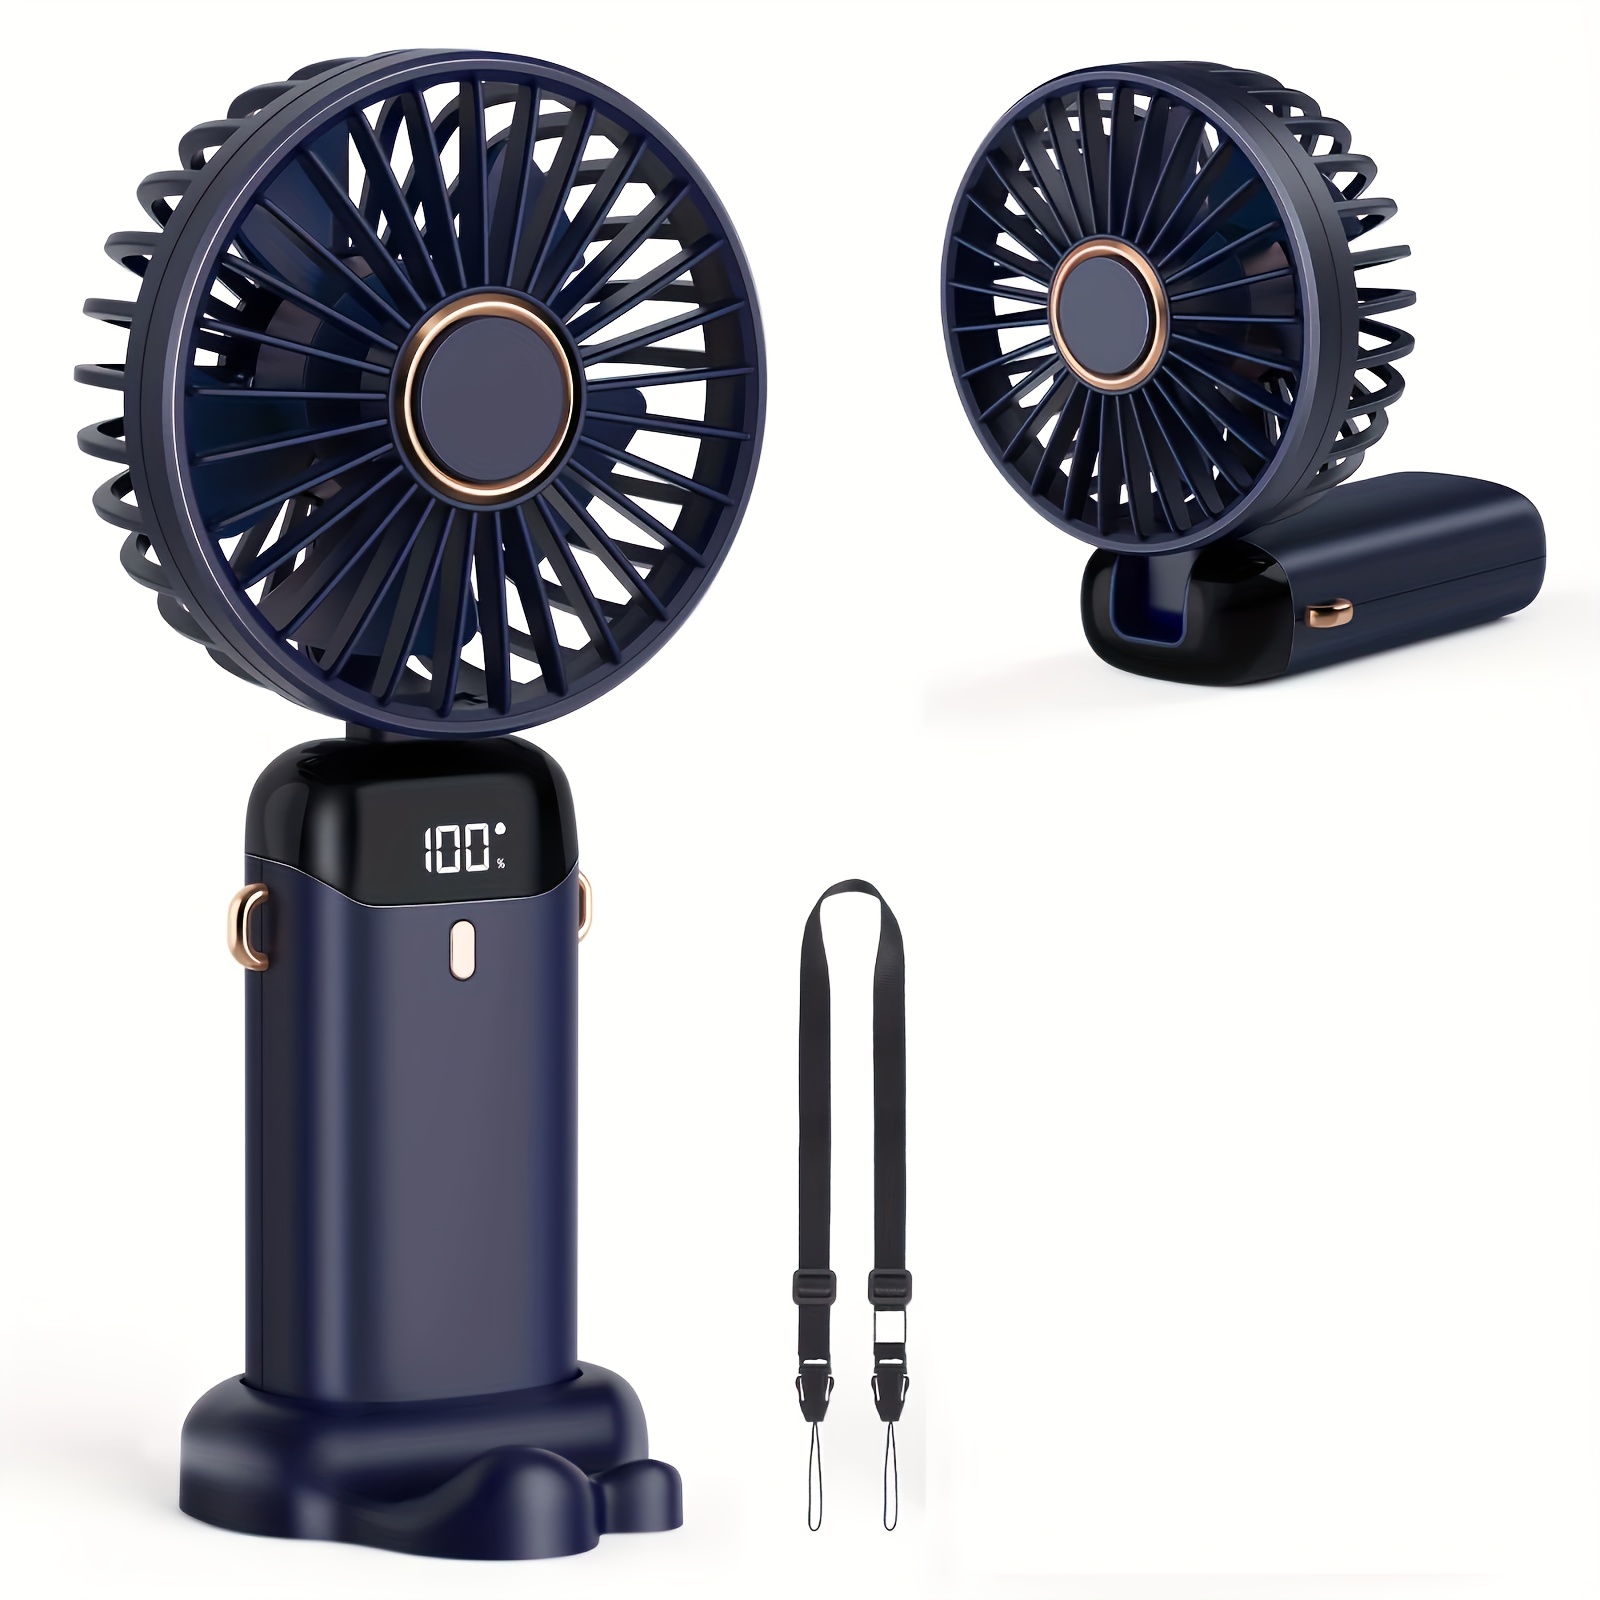 7800mAh Camping Fan with LED Lantern, Ceiling Tent Fan with Remote Control,  Power Bank, Battery Operated USB Rechargeable Fan , 180°Head Rotation  Outdoor Portable Fan for Fishing, Outdoor, Office 